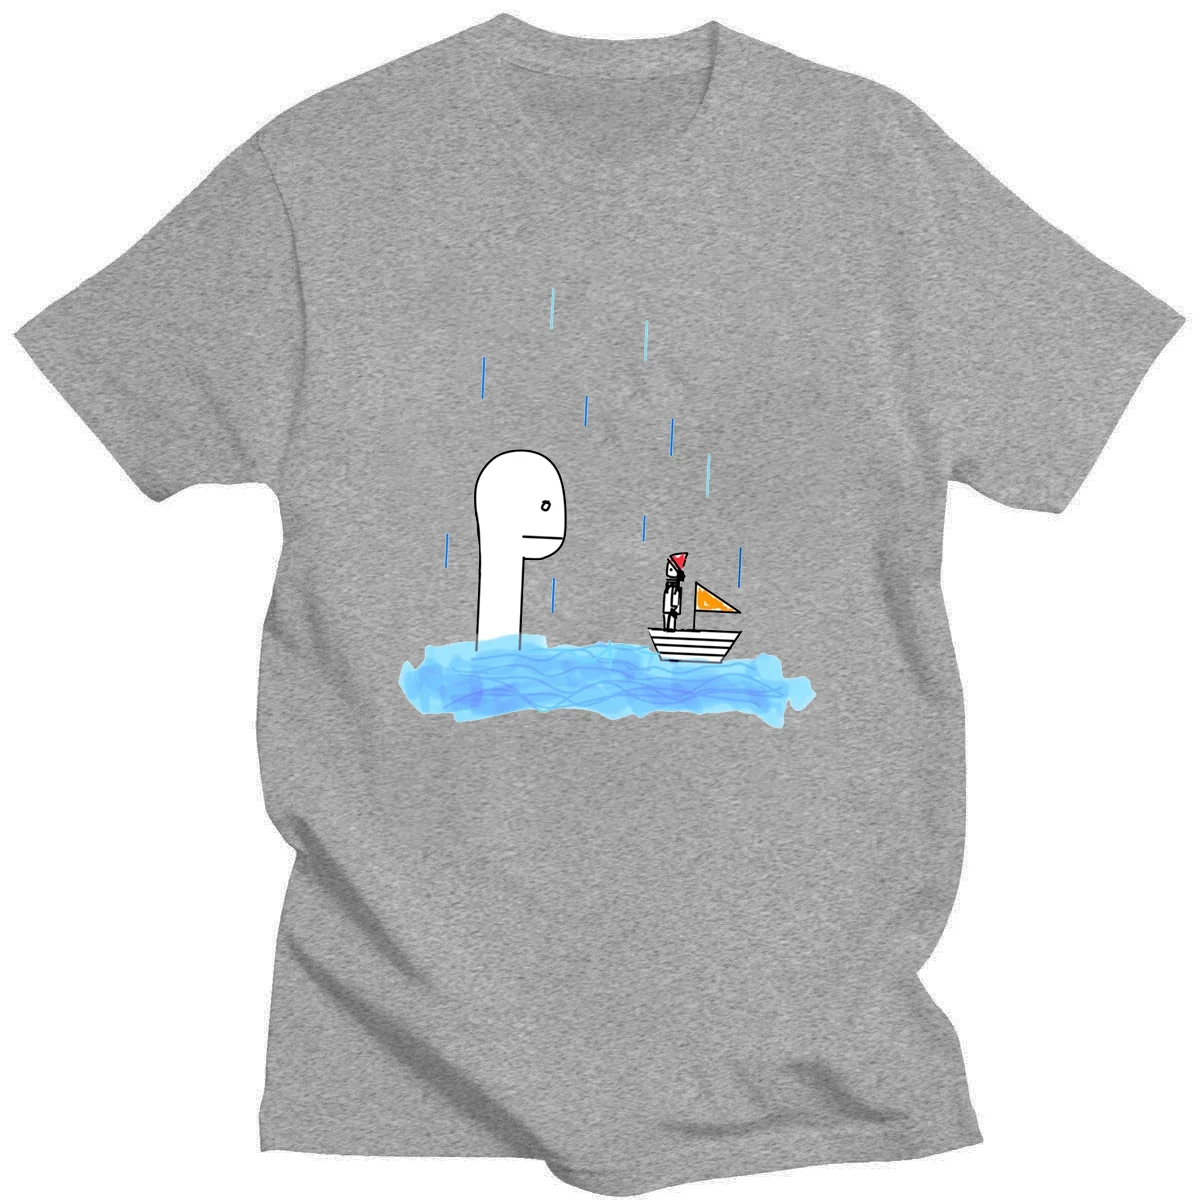 gym t shirt Cartoon Rainy Boat Print Cotton New T-Shirt Daily Simple And Funny Elements Summer Short-Sleeved 14-Color Fashion Round Neck Top white t shirt for men T-Shirts